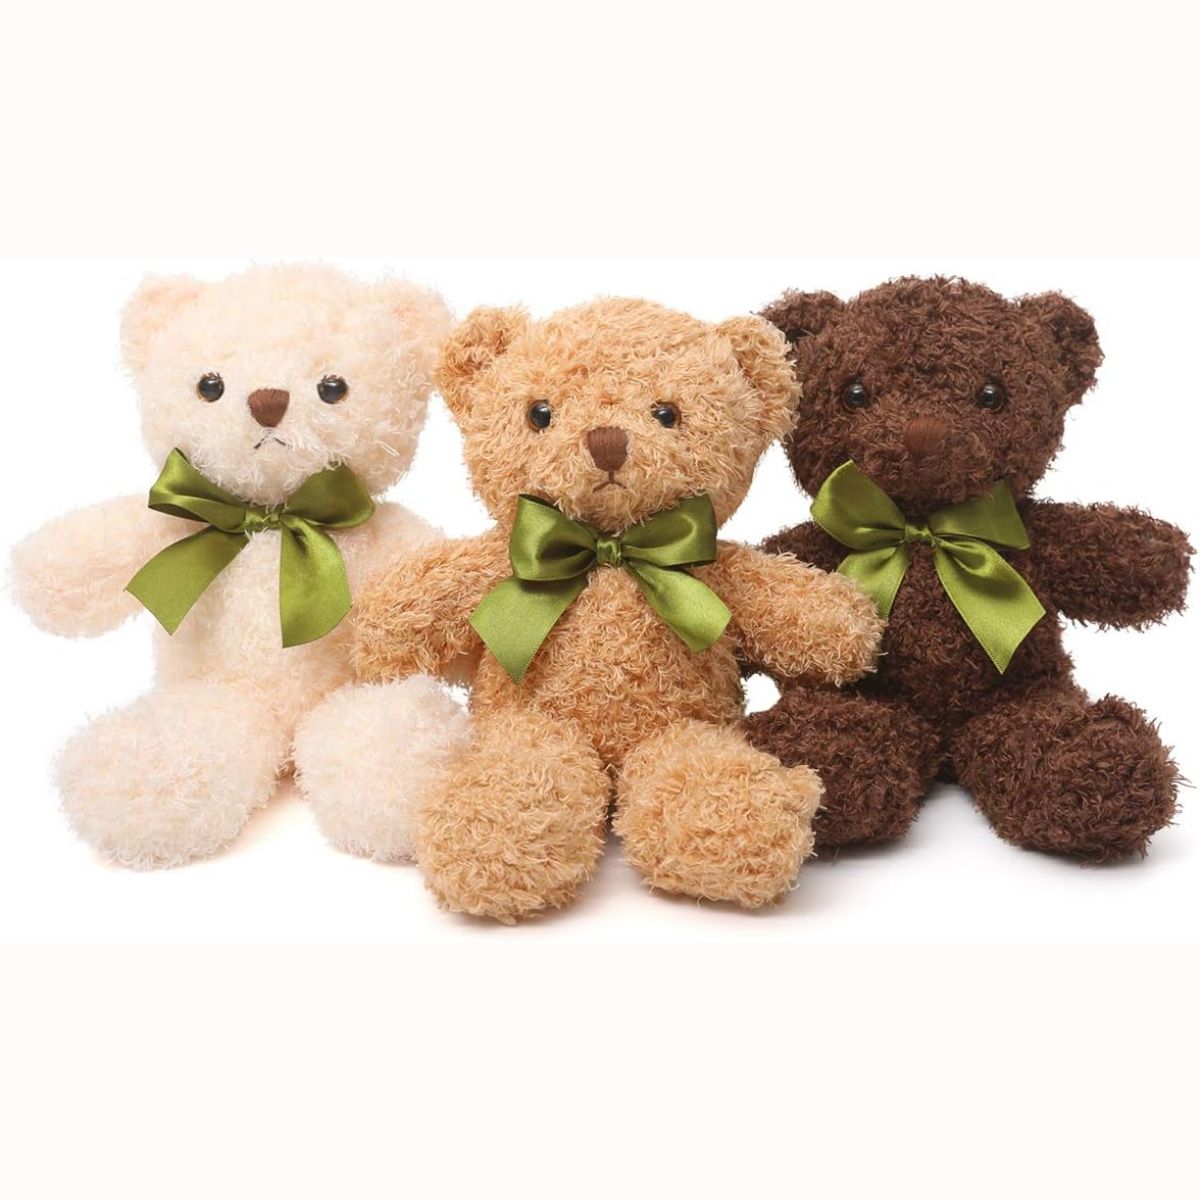 3-Pack Teddy Bear Plush Toy, 10 Inches